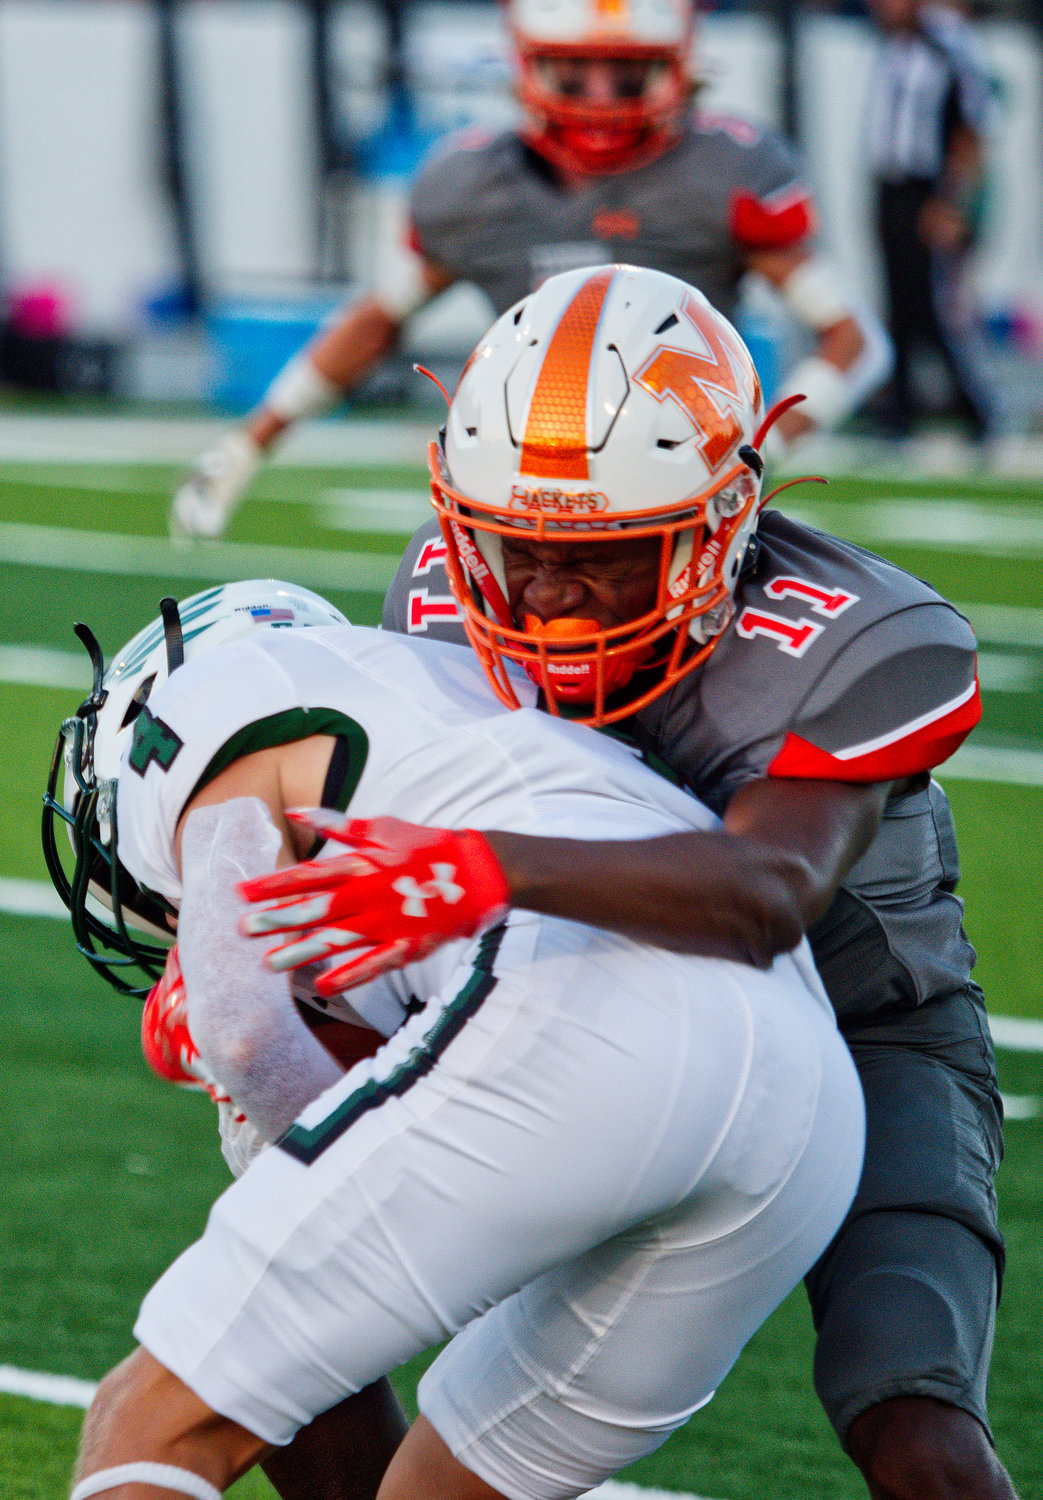 JaMarcus Kennedy wraps up the Canton ball carrier Friday night for Mineola.  [find more football photos]